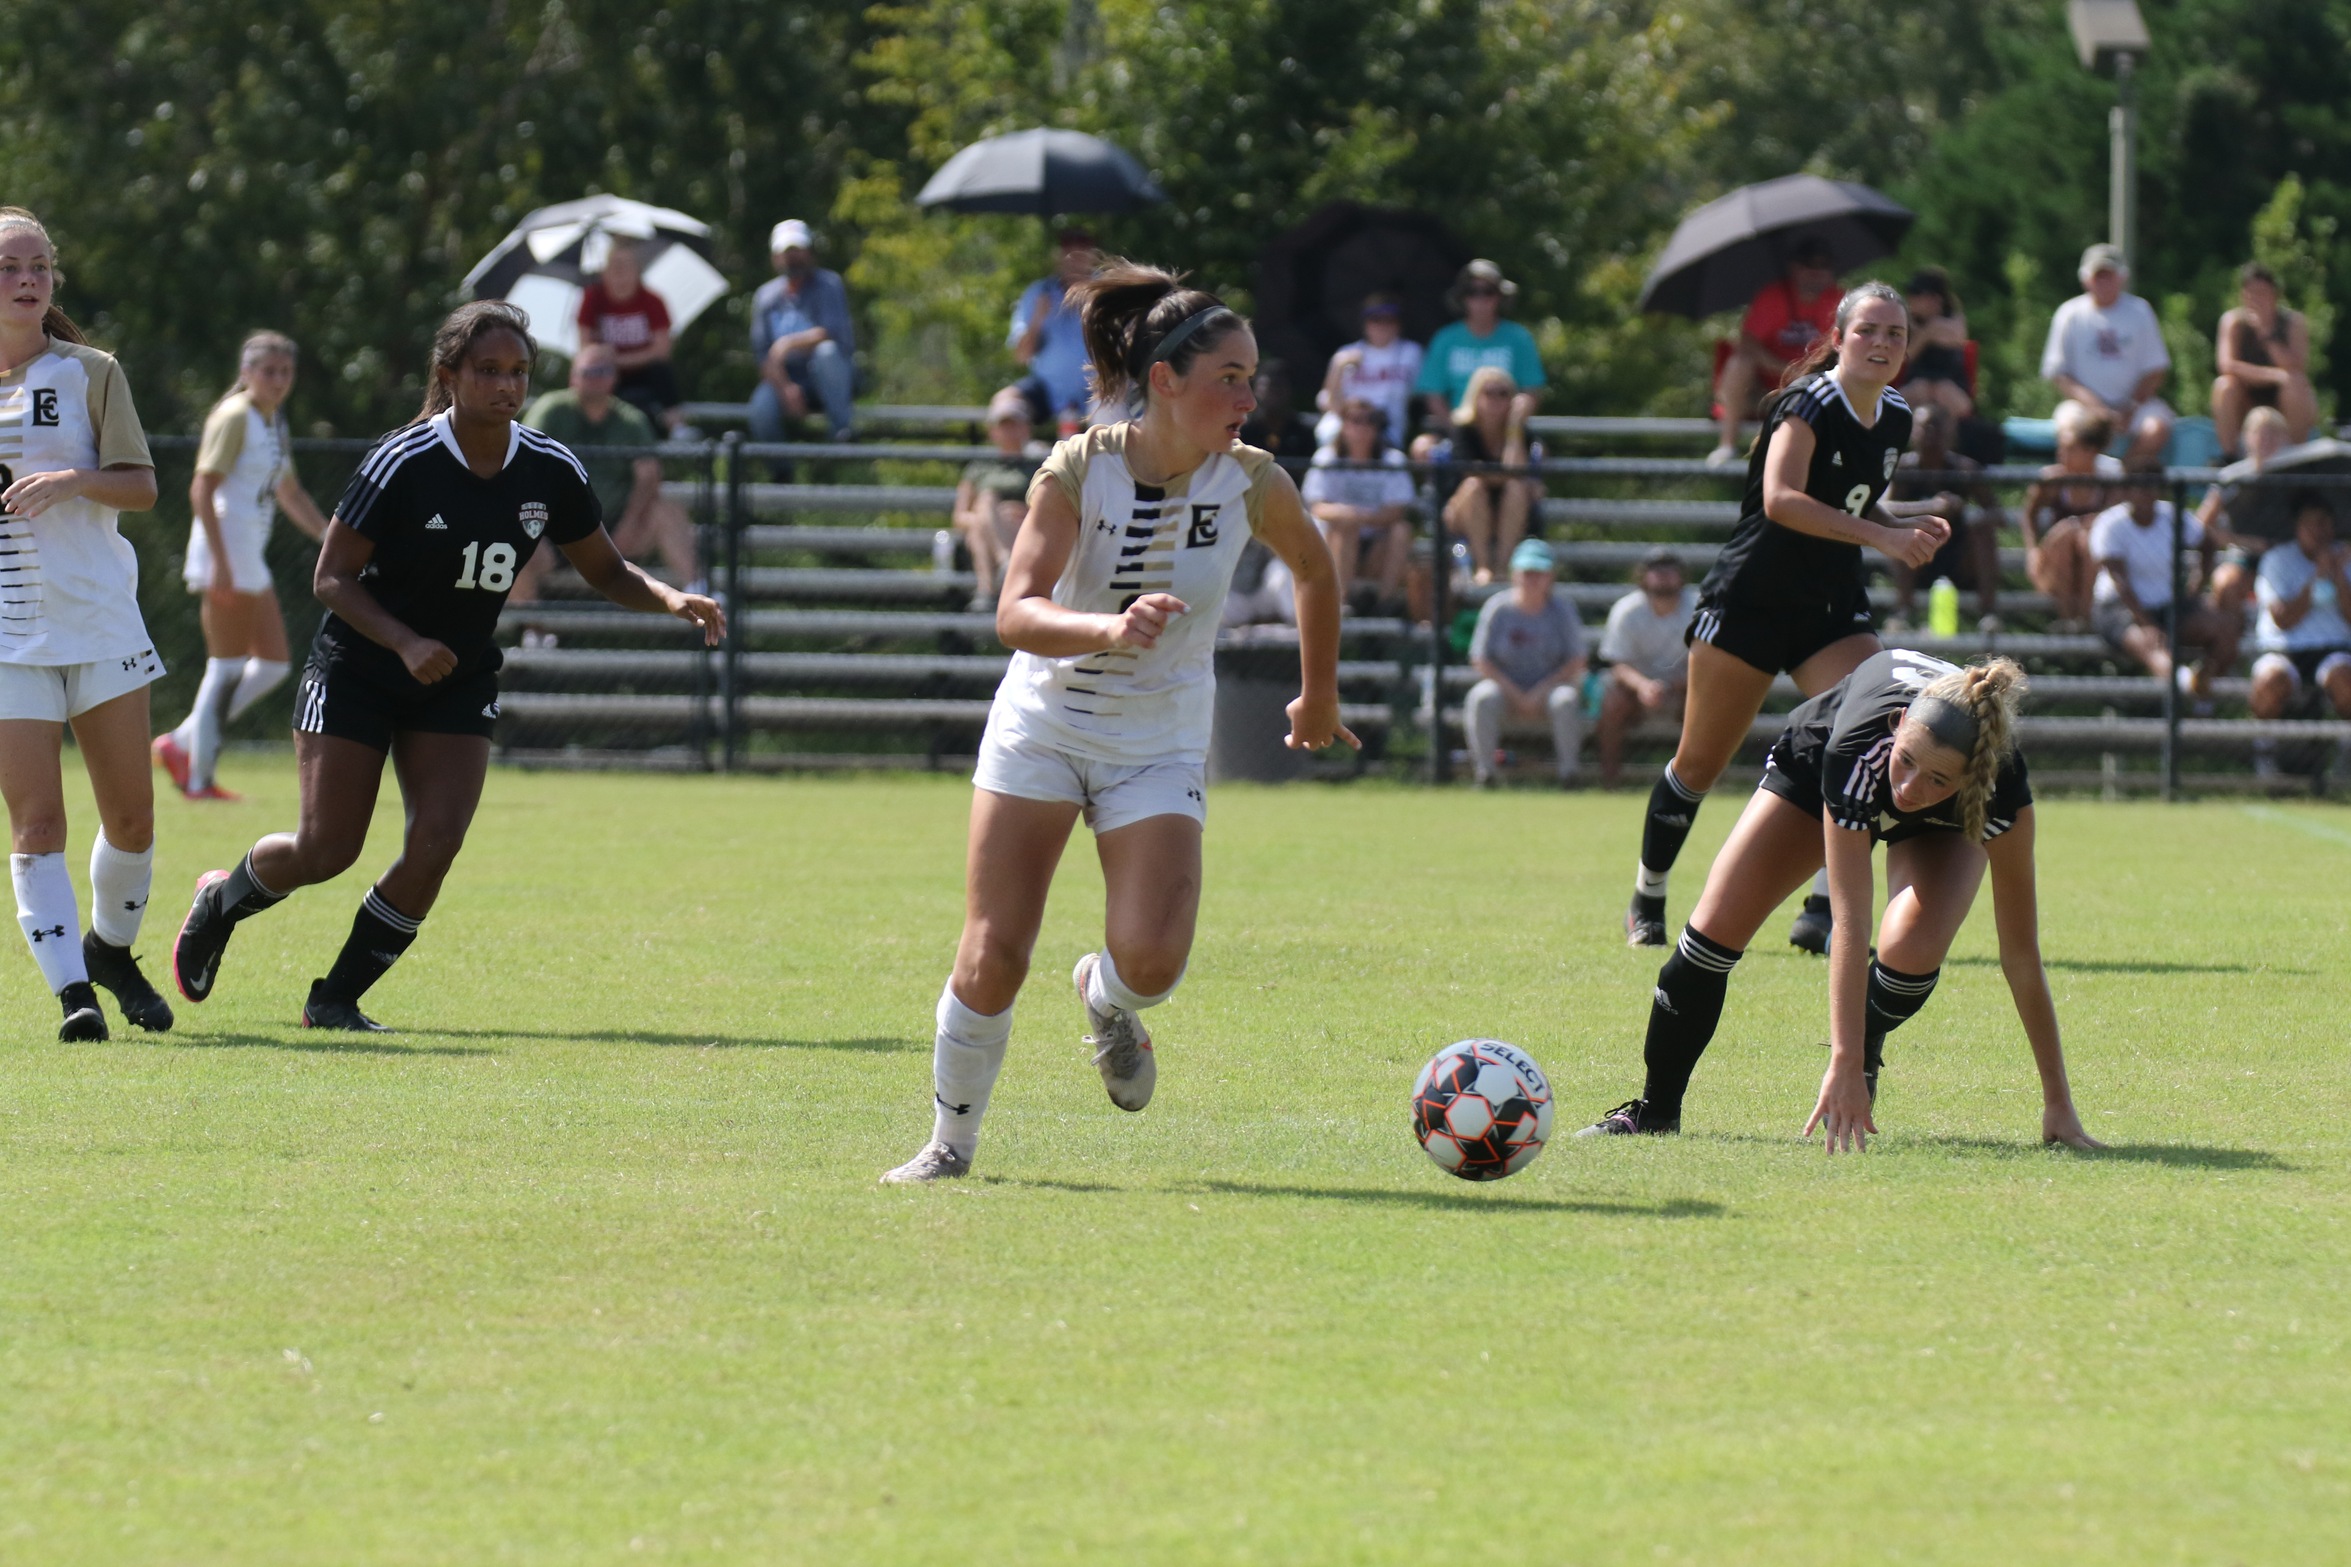 Lady Warriors defeat Hinds, 3-0